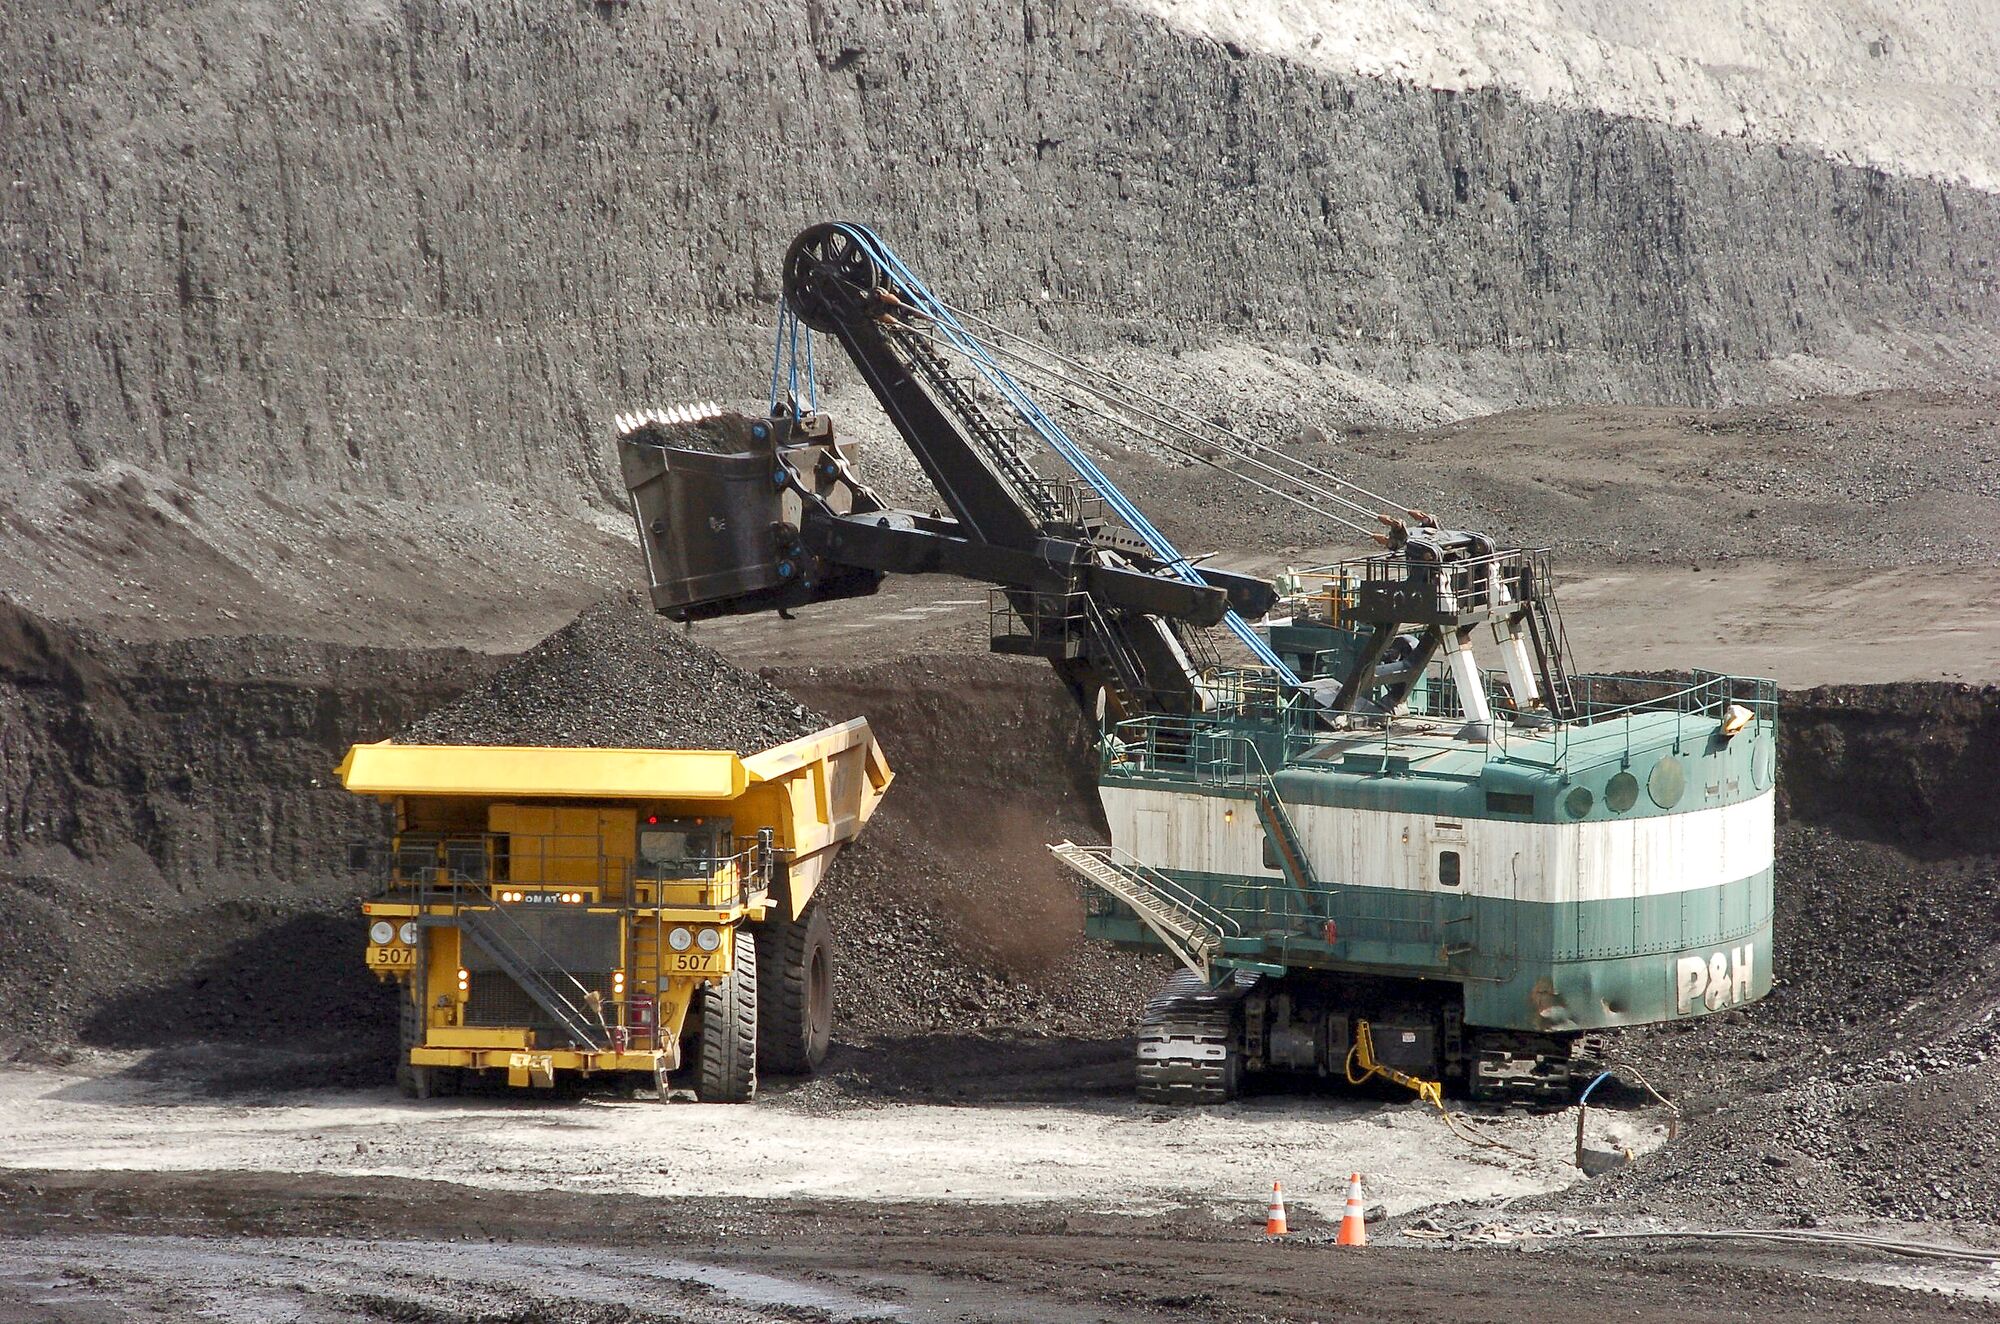 A mechanized shovel loads a haul truck that can carry up to 250 tons of coal.